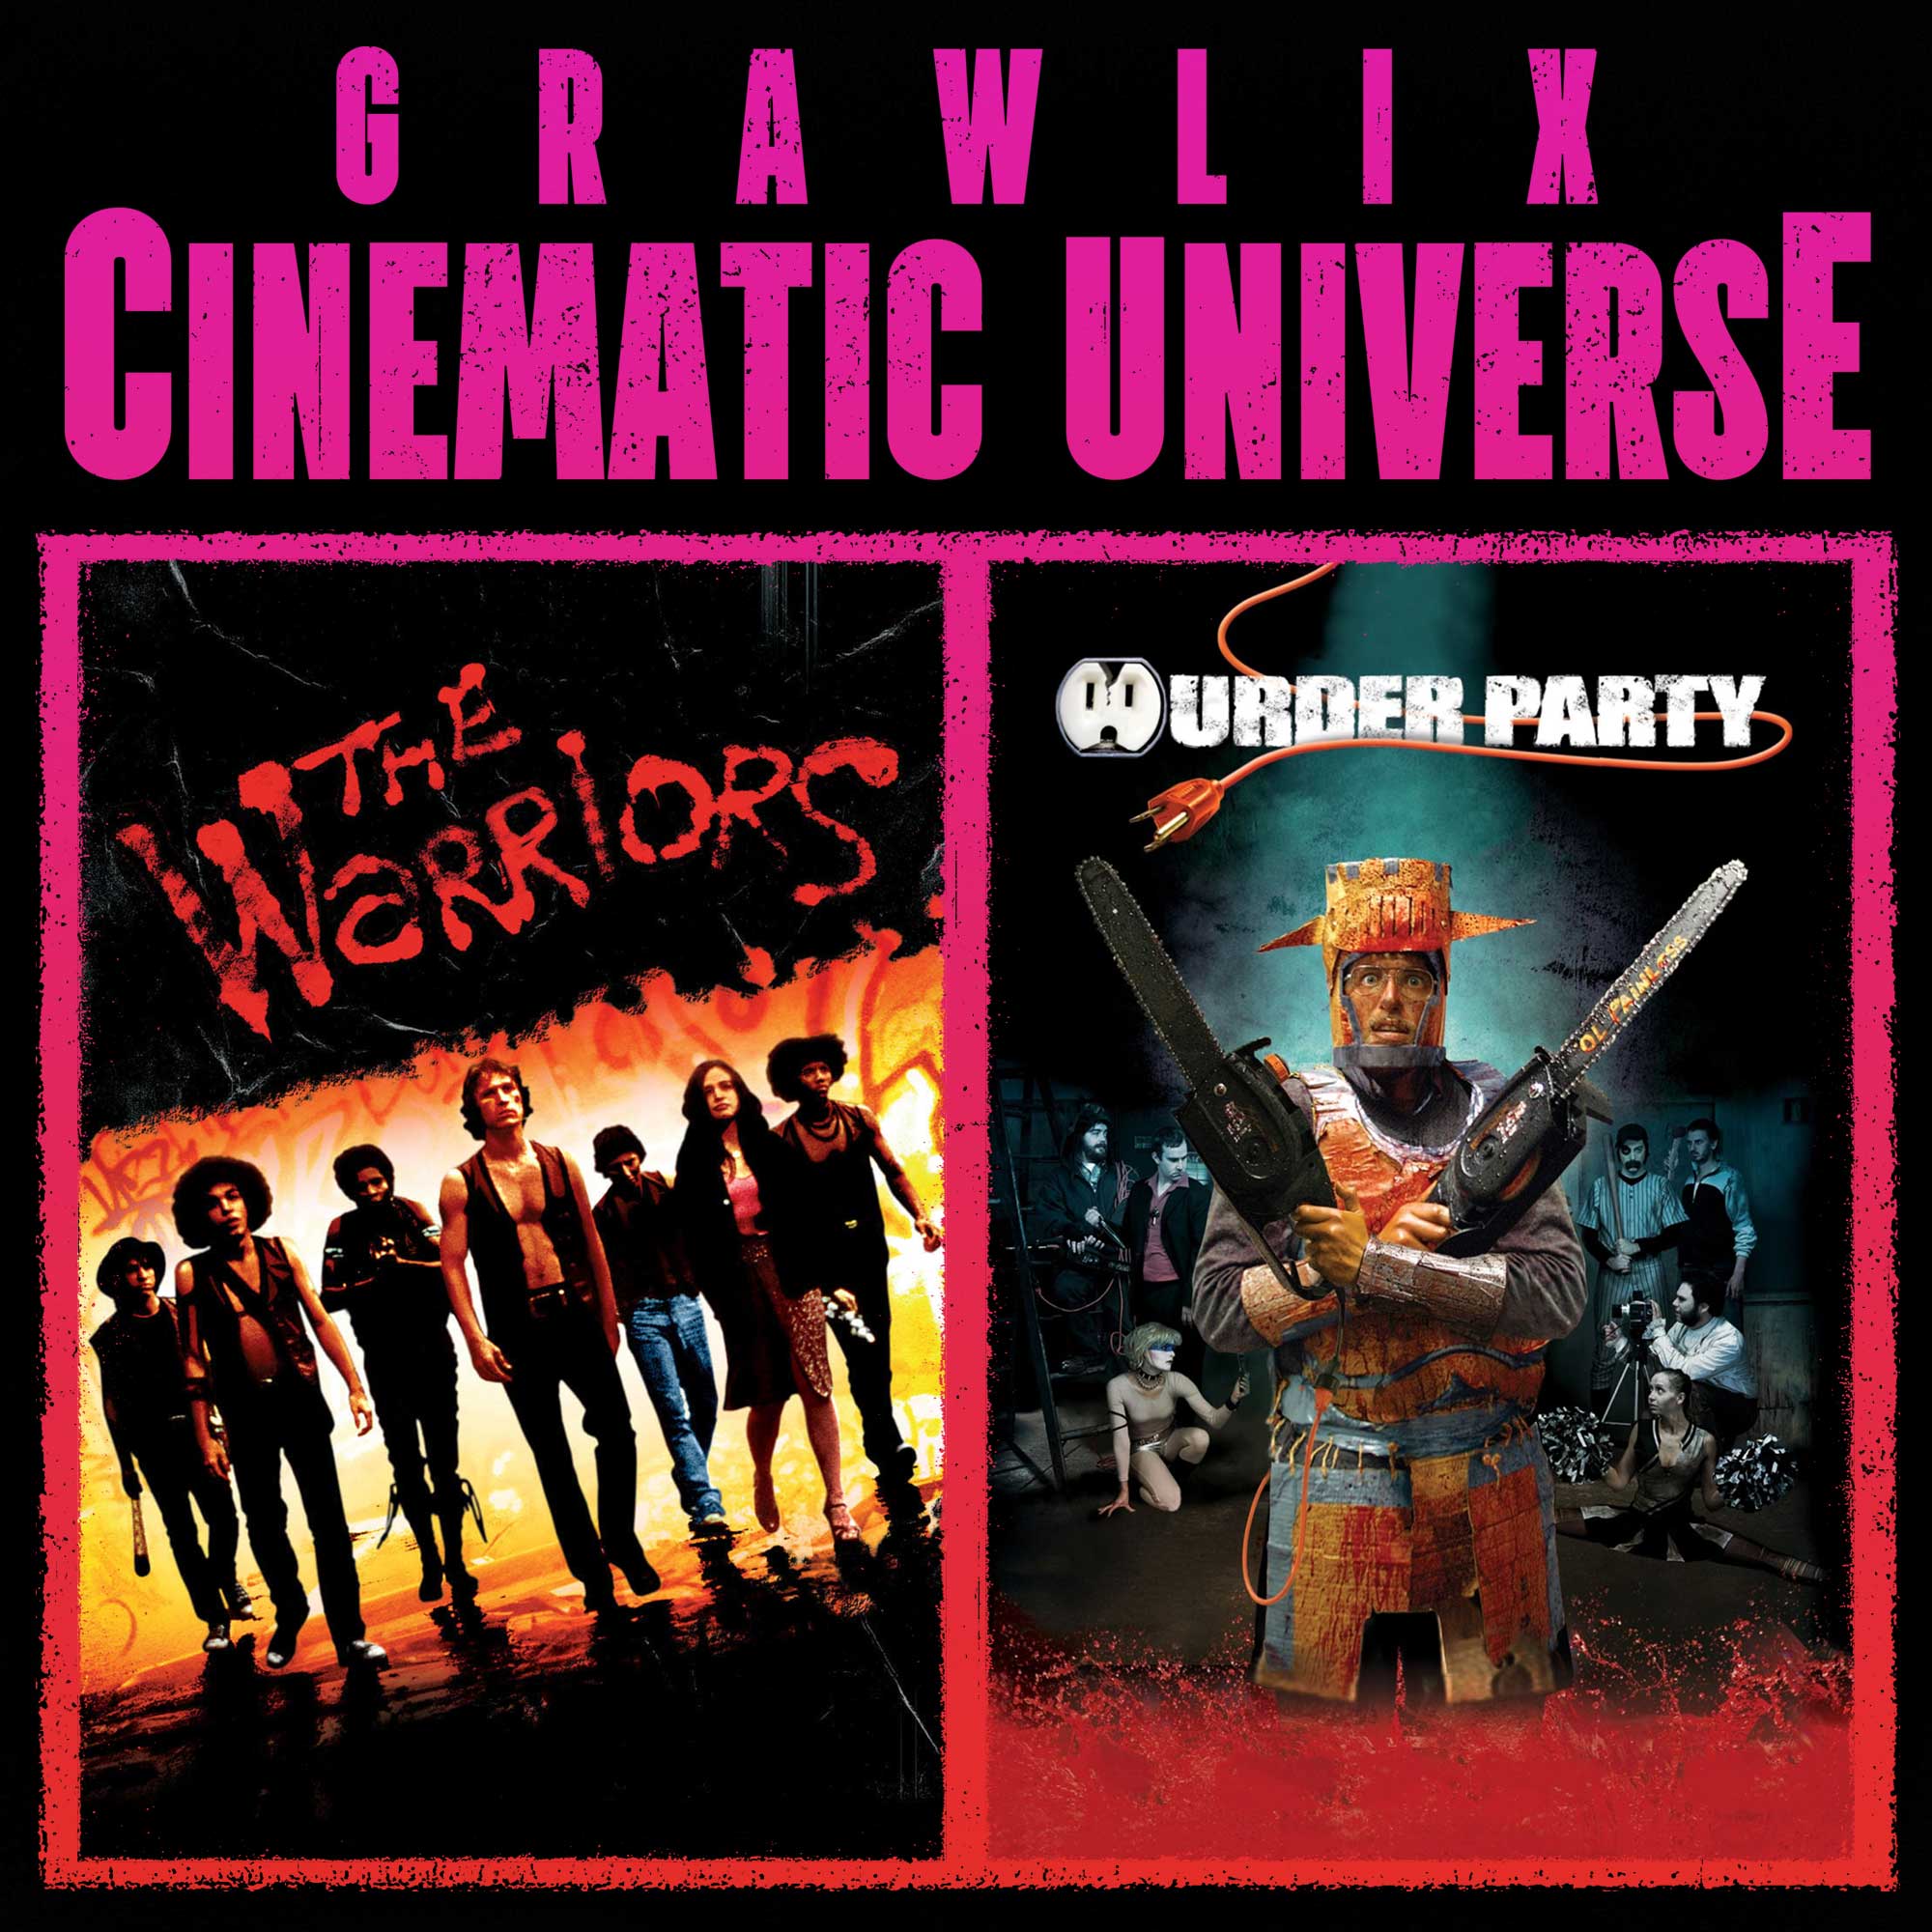 Grawlix Cinematic Universe #33: The Warriors & Murder Party